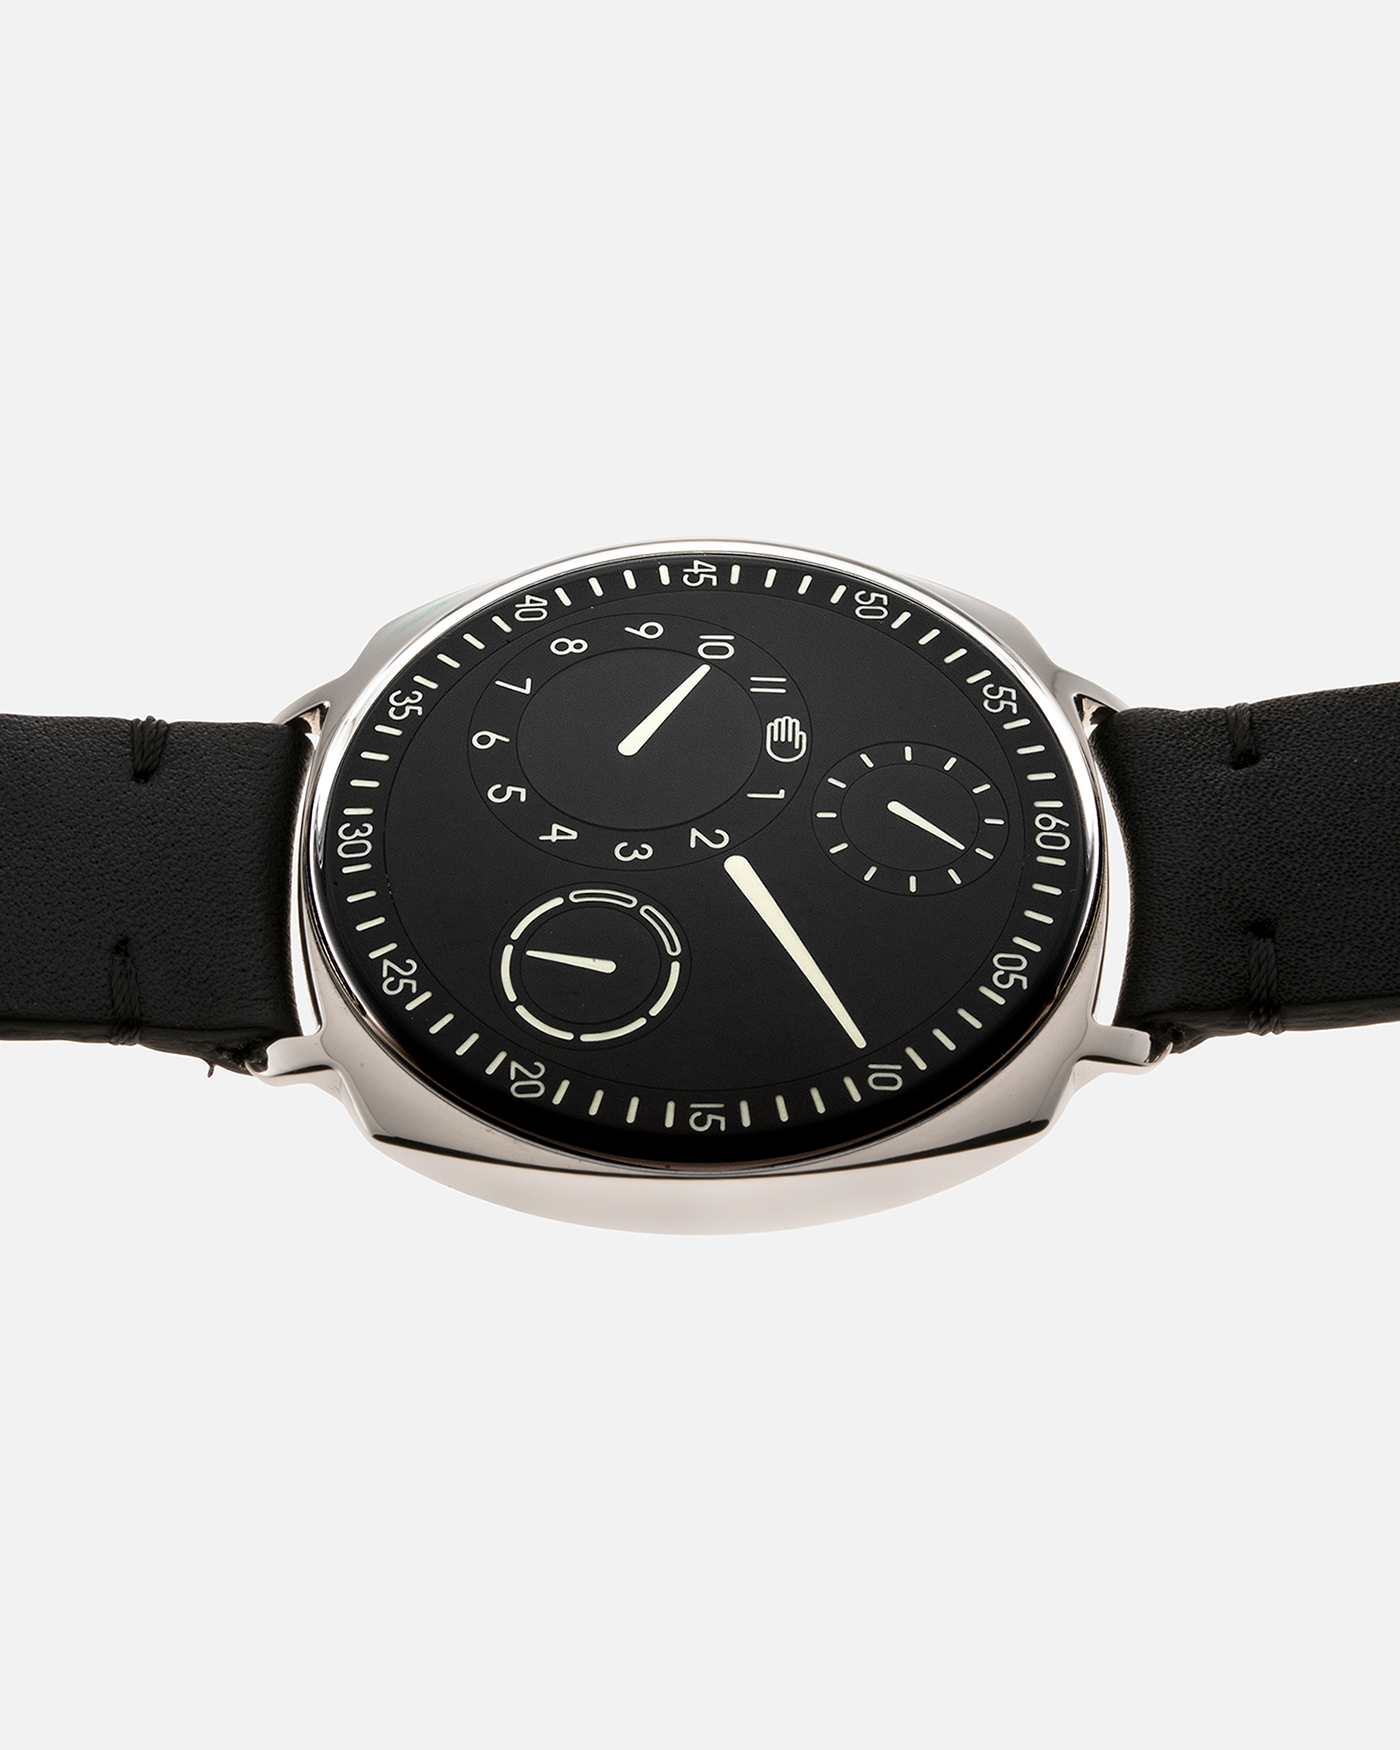 Brand: Ressence Year: 2022 Model: Type 1² Black Material: Polished Grade 5 Titanium with Satin Finished Caseback Movement: Customised ETA Cal. 2894/2 Base with In-House Patented Ressence Orbital Convex System (ROCS) 1 Module Driven by Minute Axle, Self-Winding Case Dimensions: 42mm Bracelet/Strap: Ressence Black Calf Leather Strap with Signed Ardillon Buckle